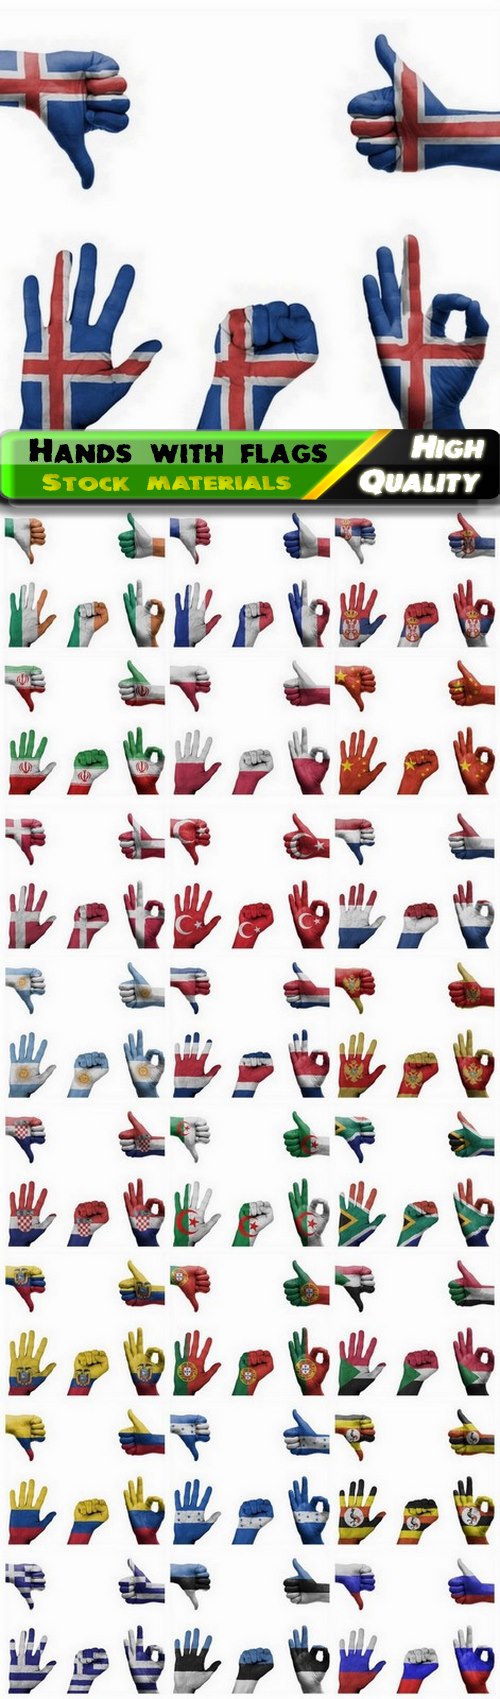 Human hands with different country flags 2 - 25 HQ Jpg